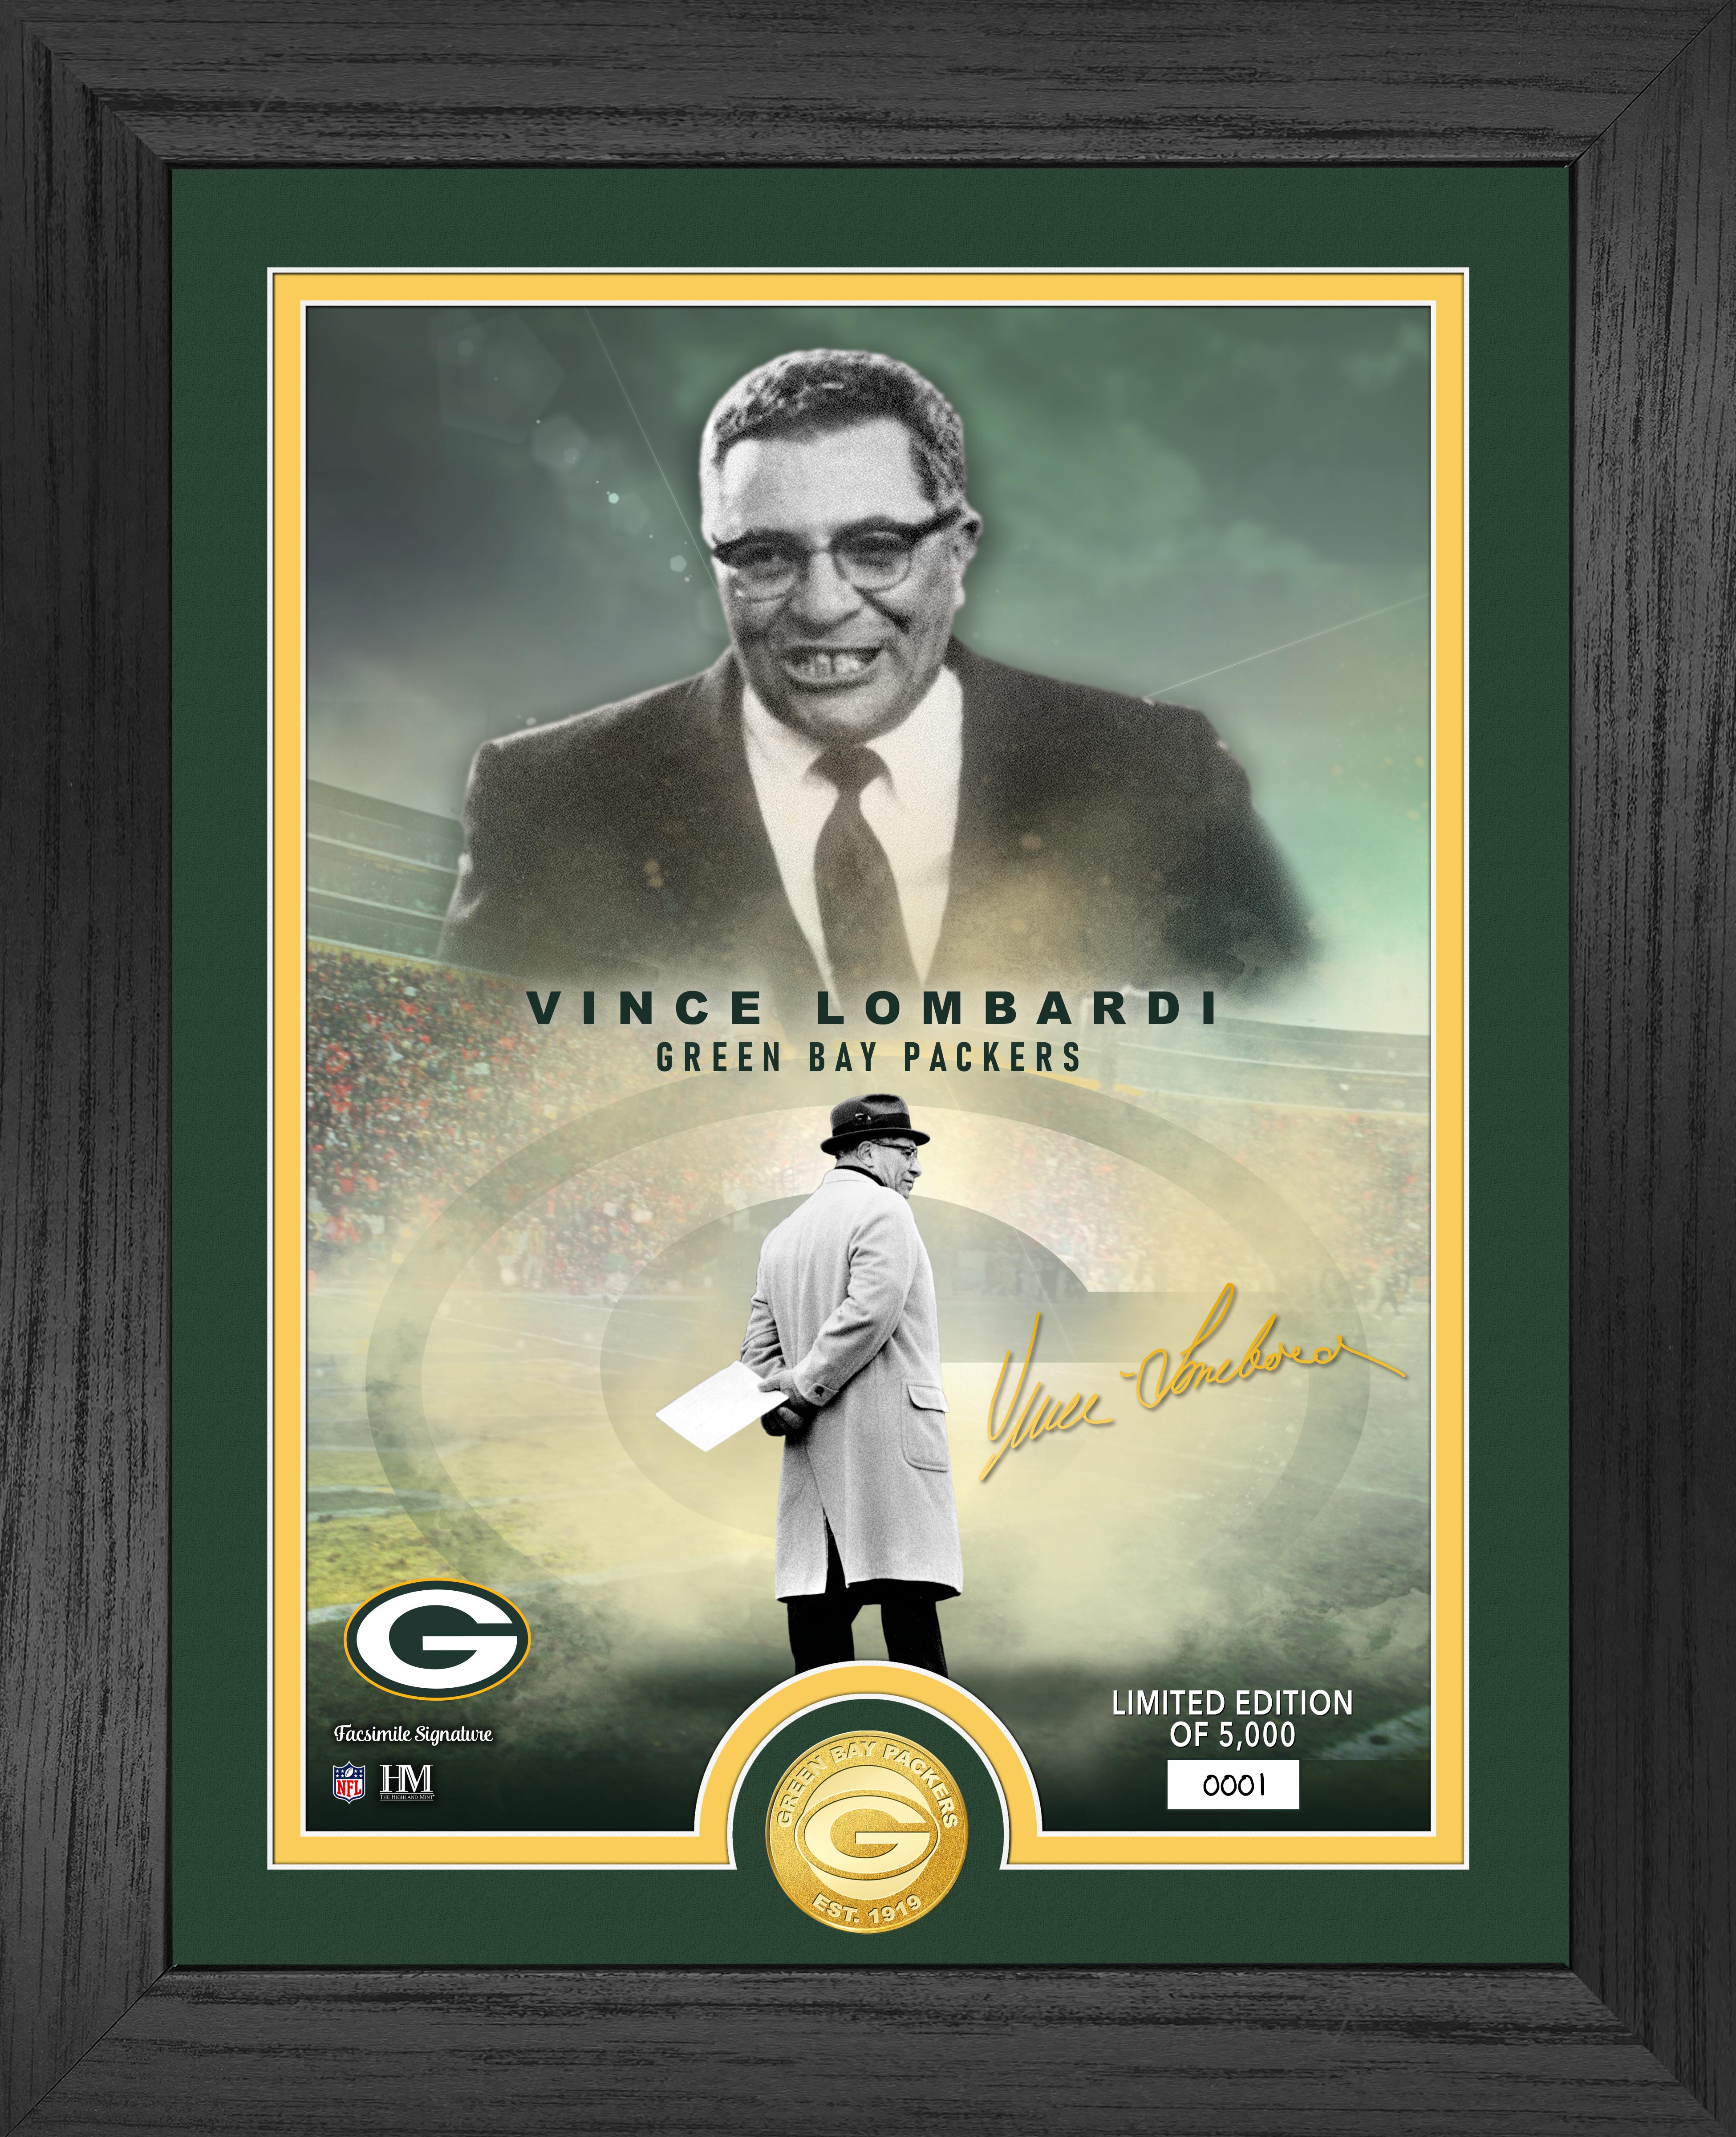 Vince Lombardi Green Bay Packers Bronze Coin Photo Mint